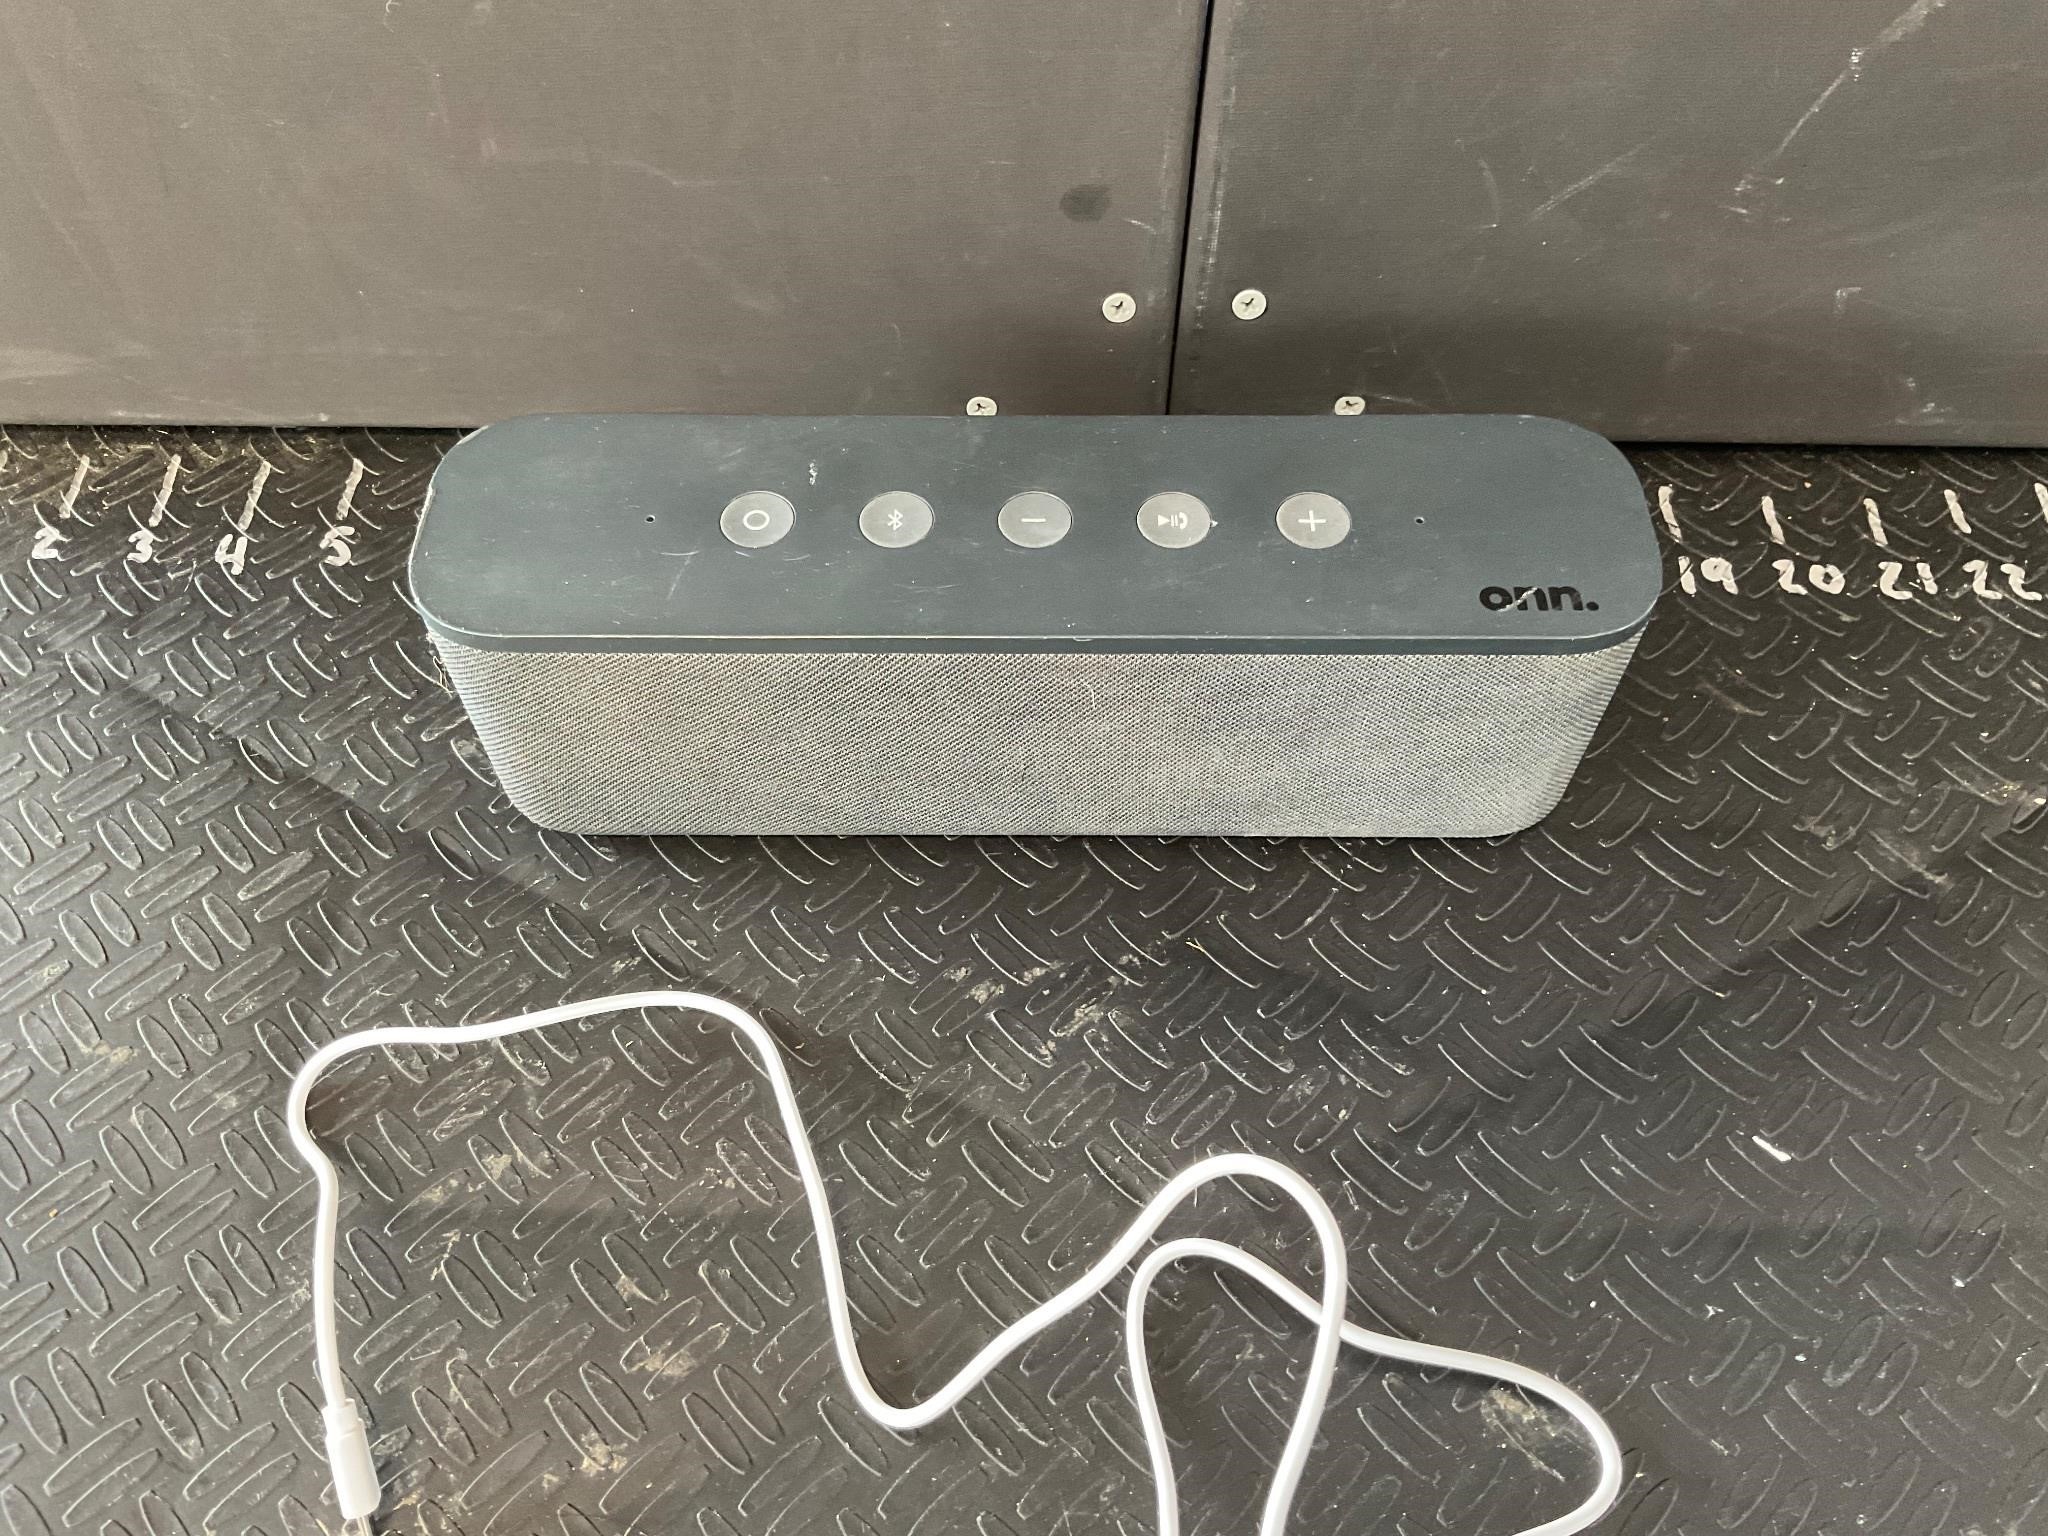 Onn wireless speaker tested works scratches